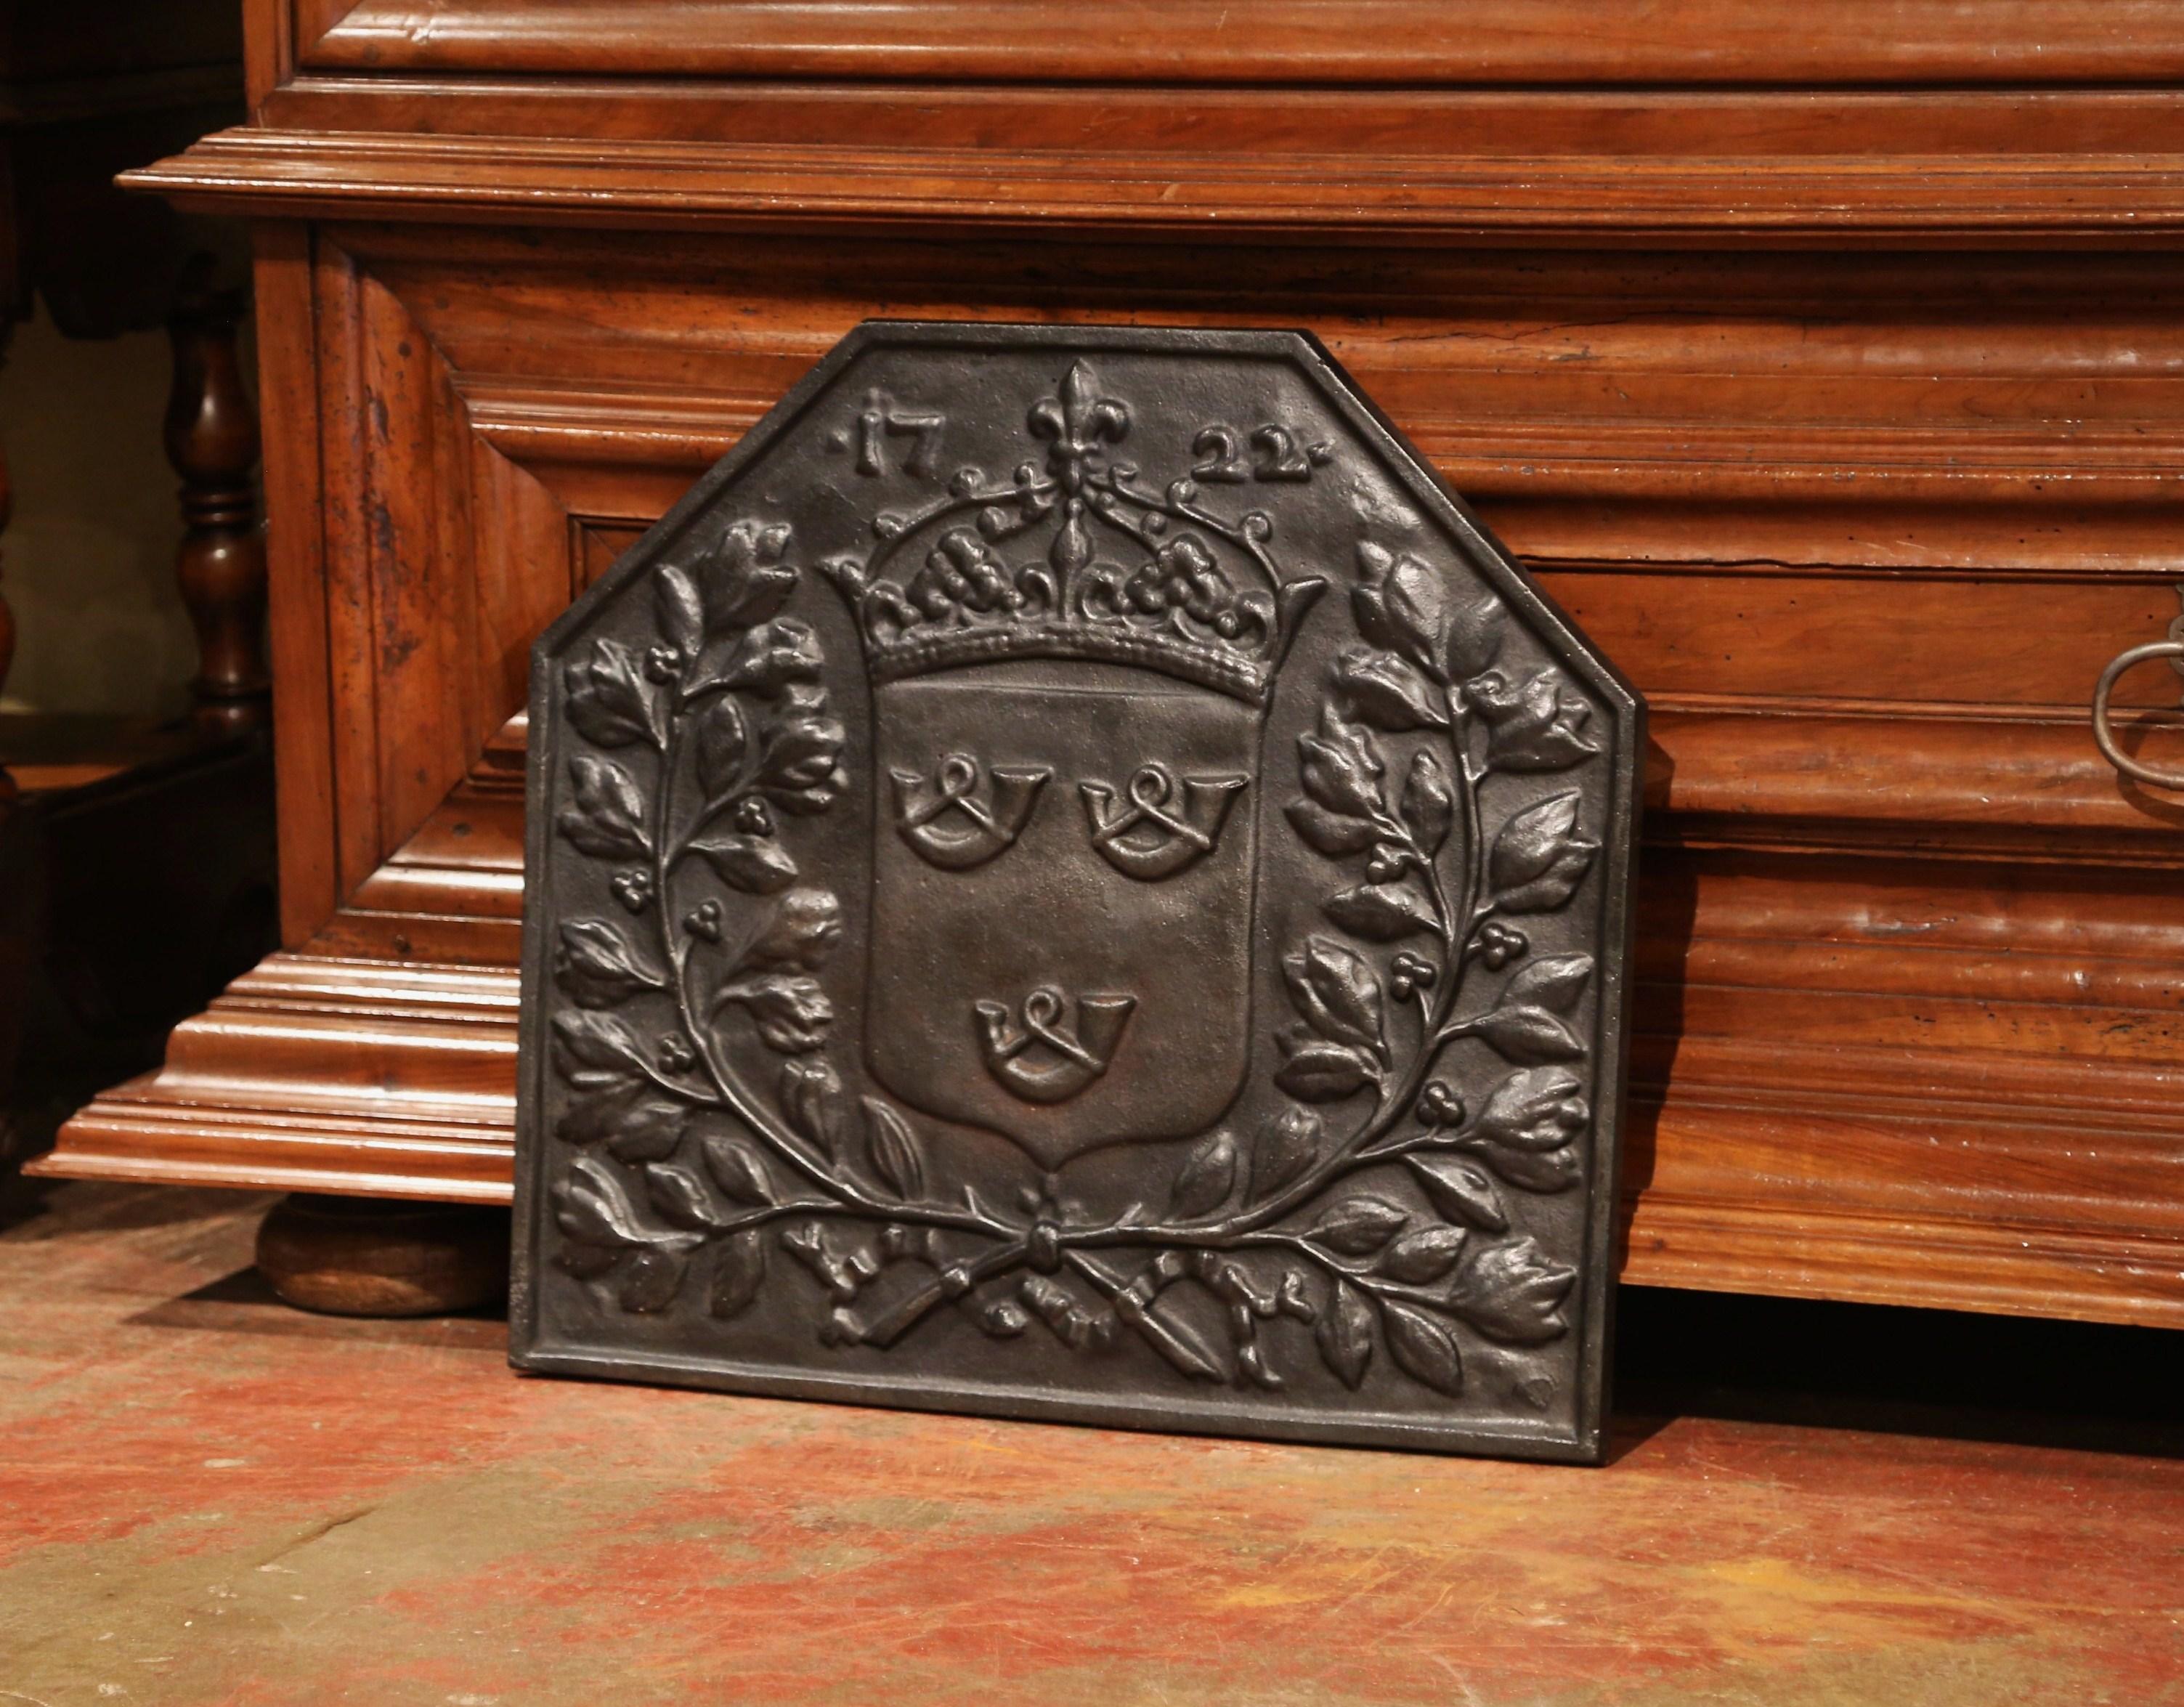 Decorate your fireplace or kitchen back splash with this elegant antique fire back from France, circa 1870. The ornate fireplace essential with a date of 1722 at the top, features a typical French family 